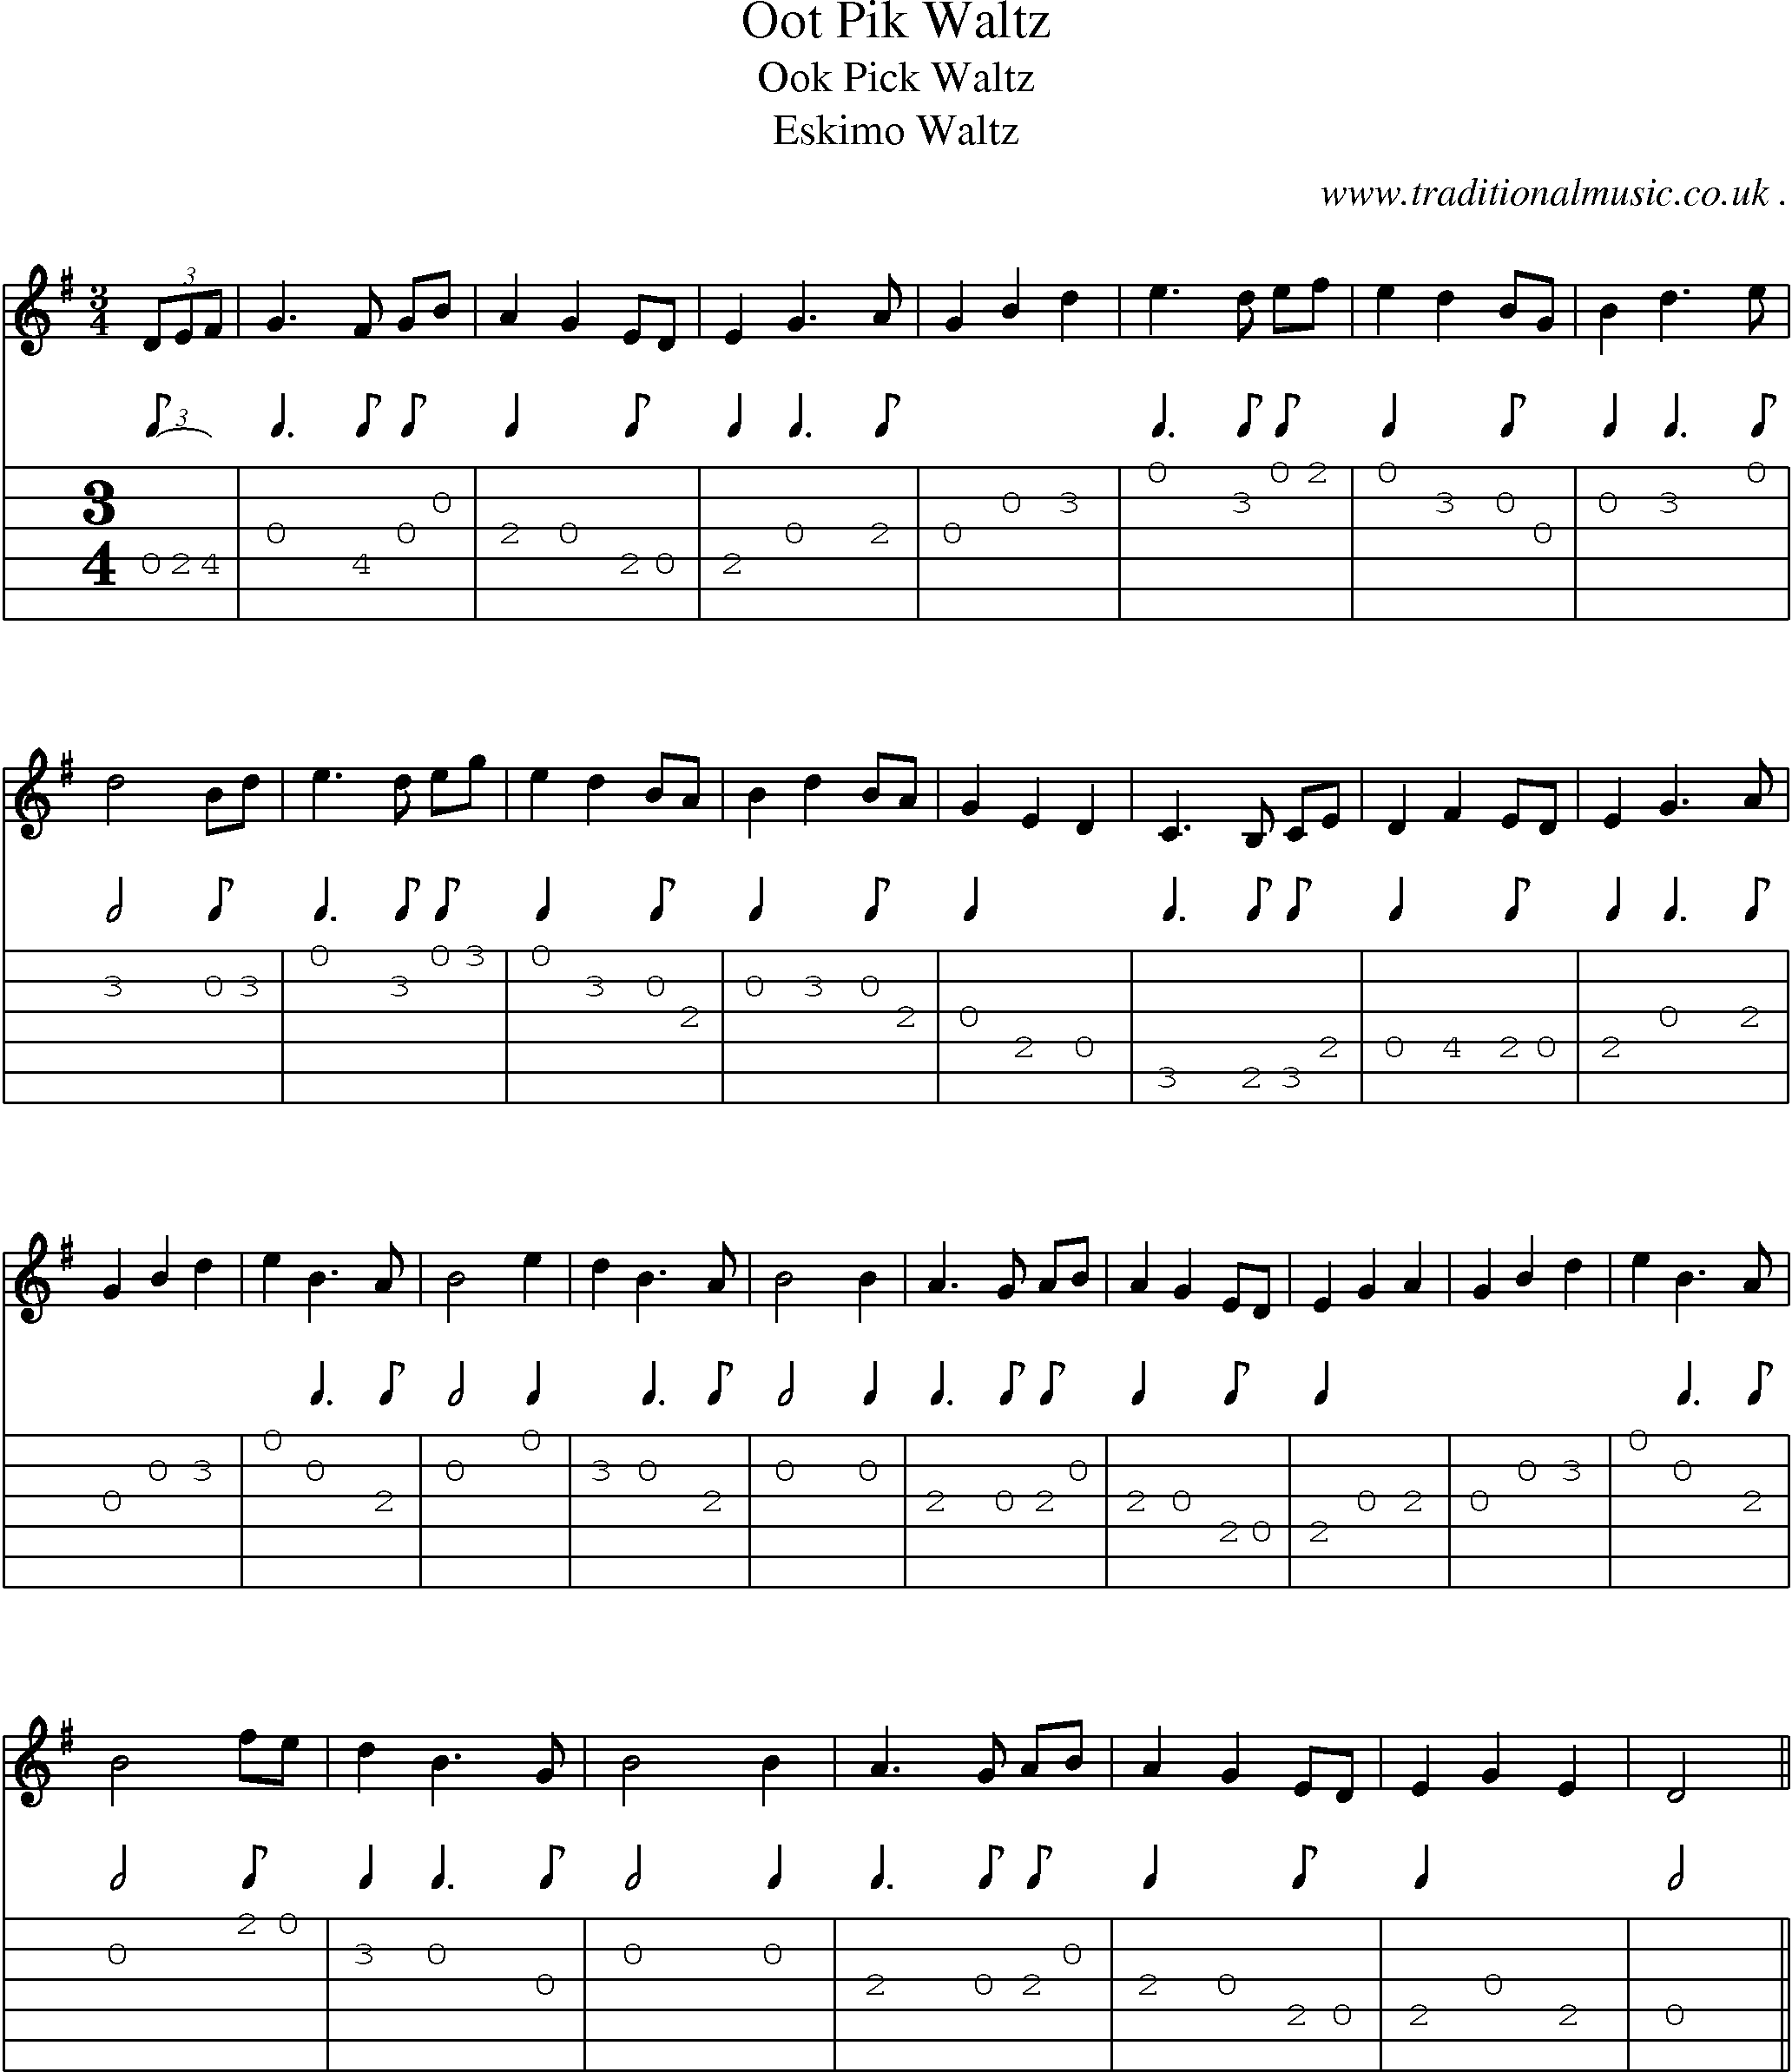 Sheet-Music and Guitar Tabs for Oot Pik Waltz